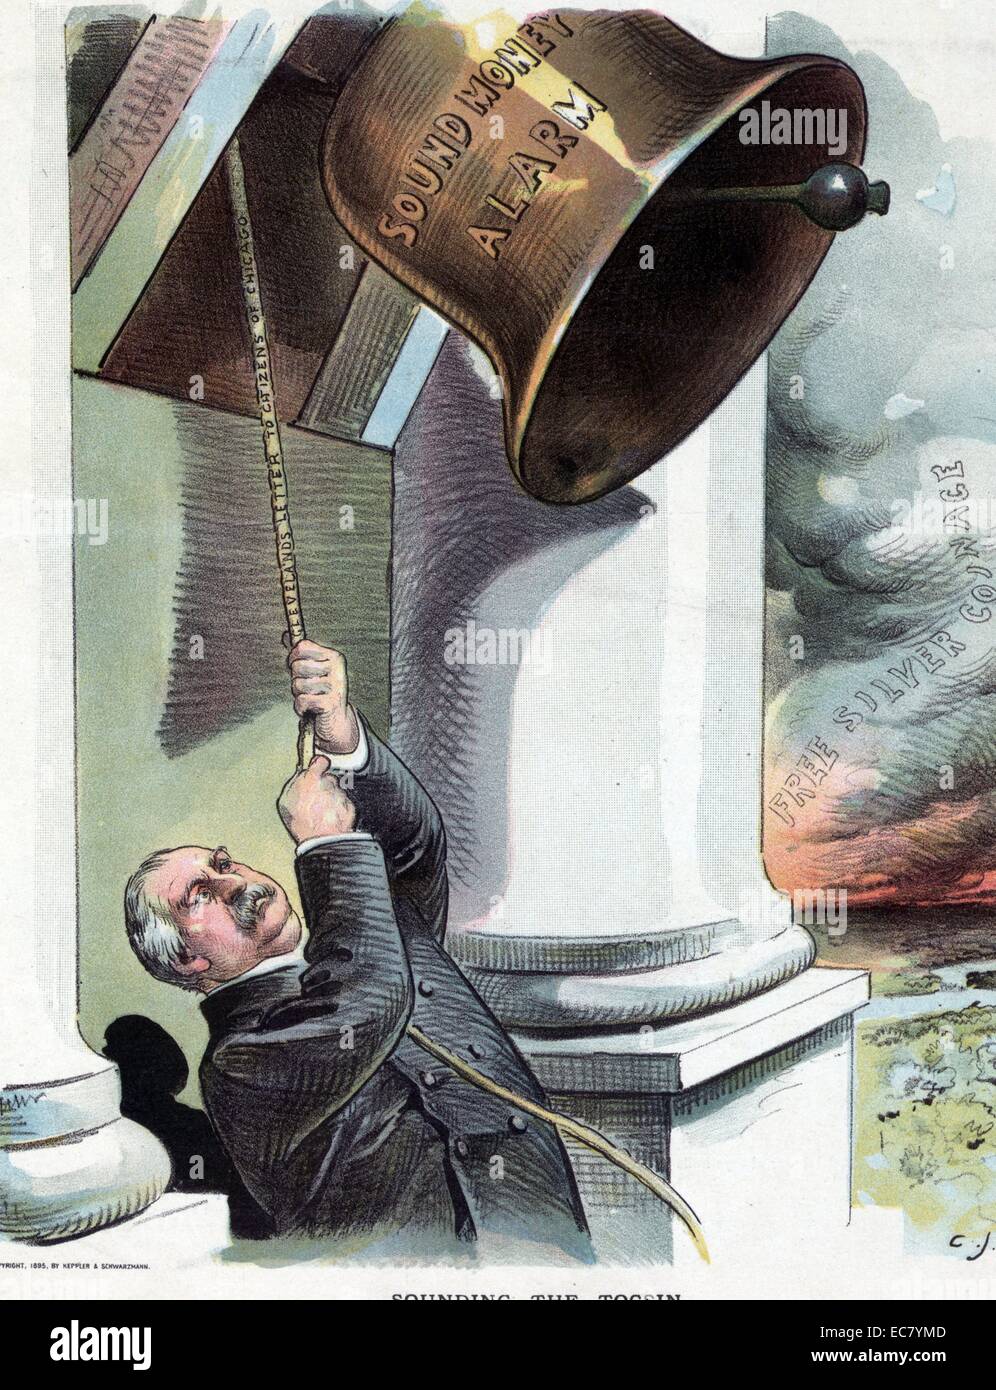 Sounding the tocsin' President Cleveland pulling on a rope labelled 'Cleveland's letter to the Citizens of Chicago', ringing a bell labelled 'Sound Money Alarm', to warn them that dark smoke labelled 'Free Silver Coinage' from a raging fire is bearing down upon them. Stock Photo